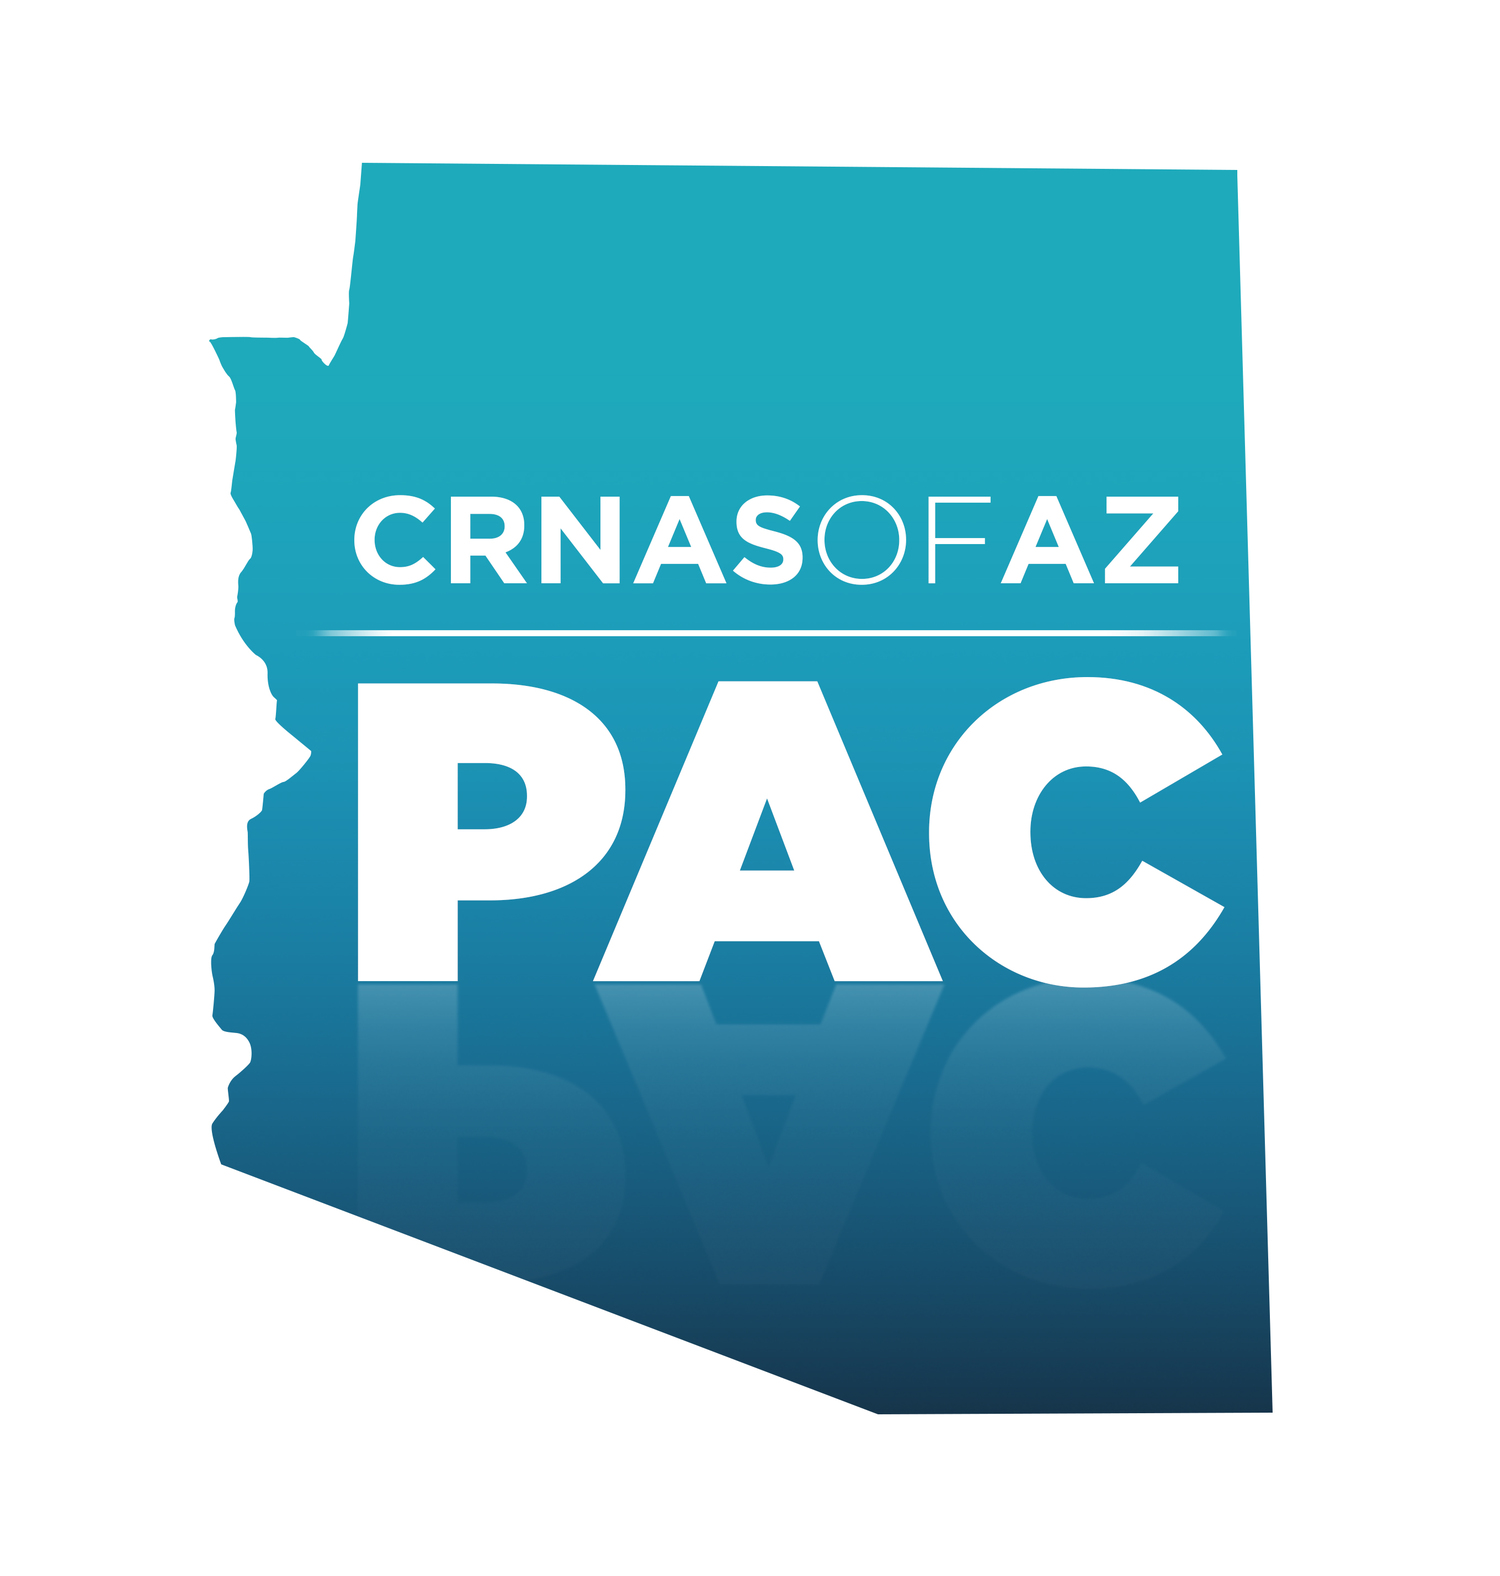 CRNAs of AZ Political Action Committee